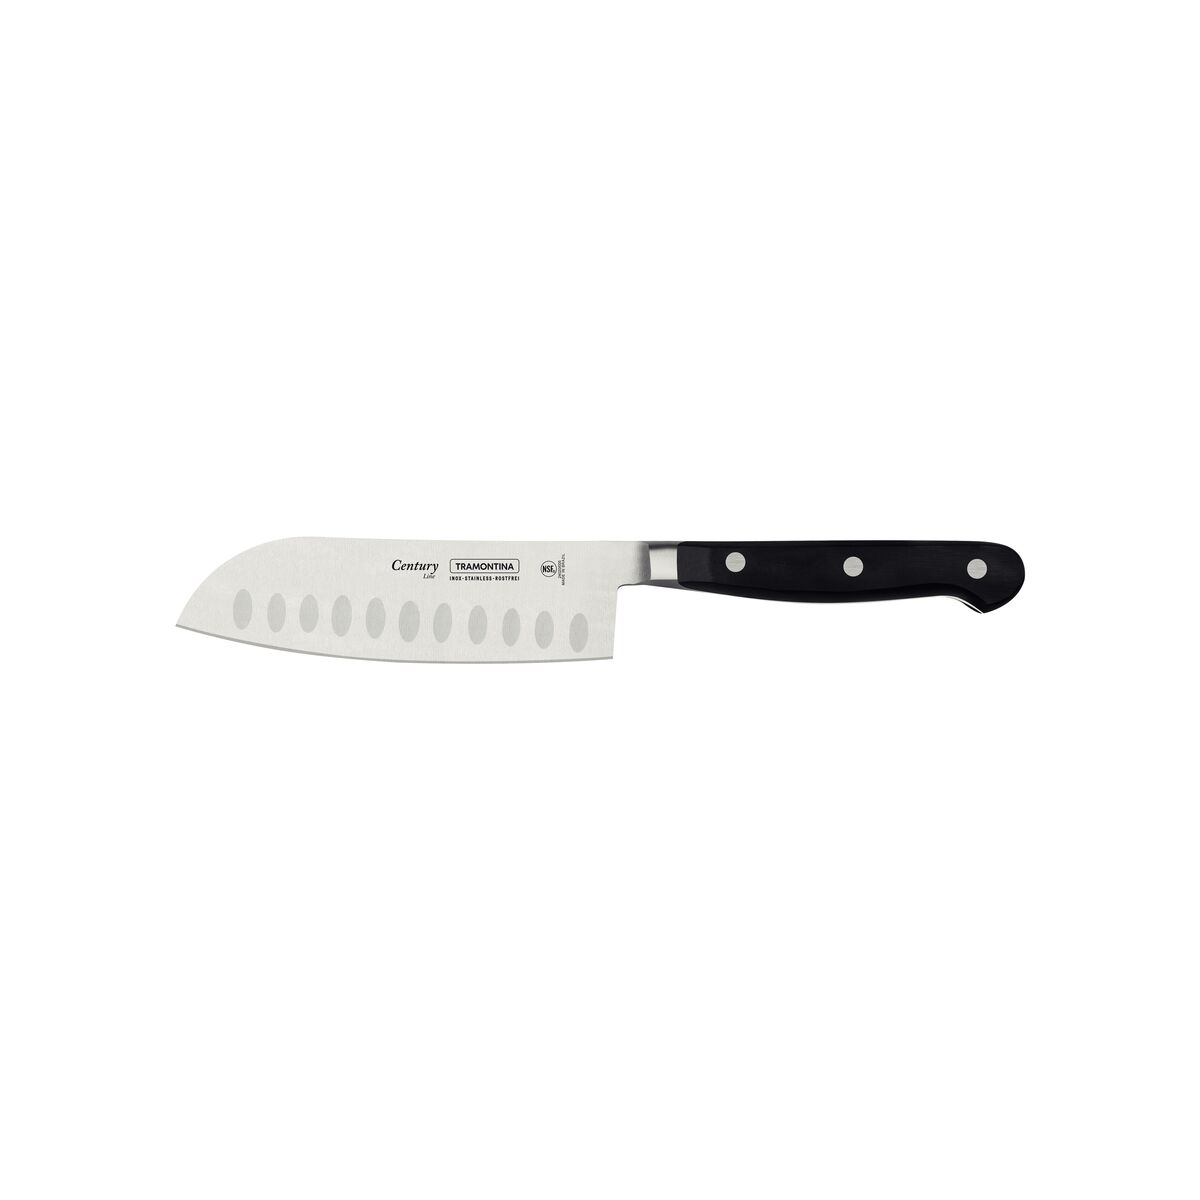 Tramontina Century 5" Santoku knife with Stainless-Steel Blade and Black Polycarbonate Handle